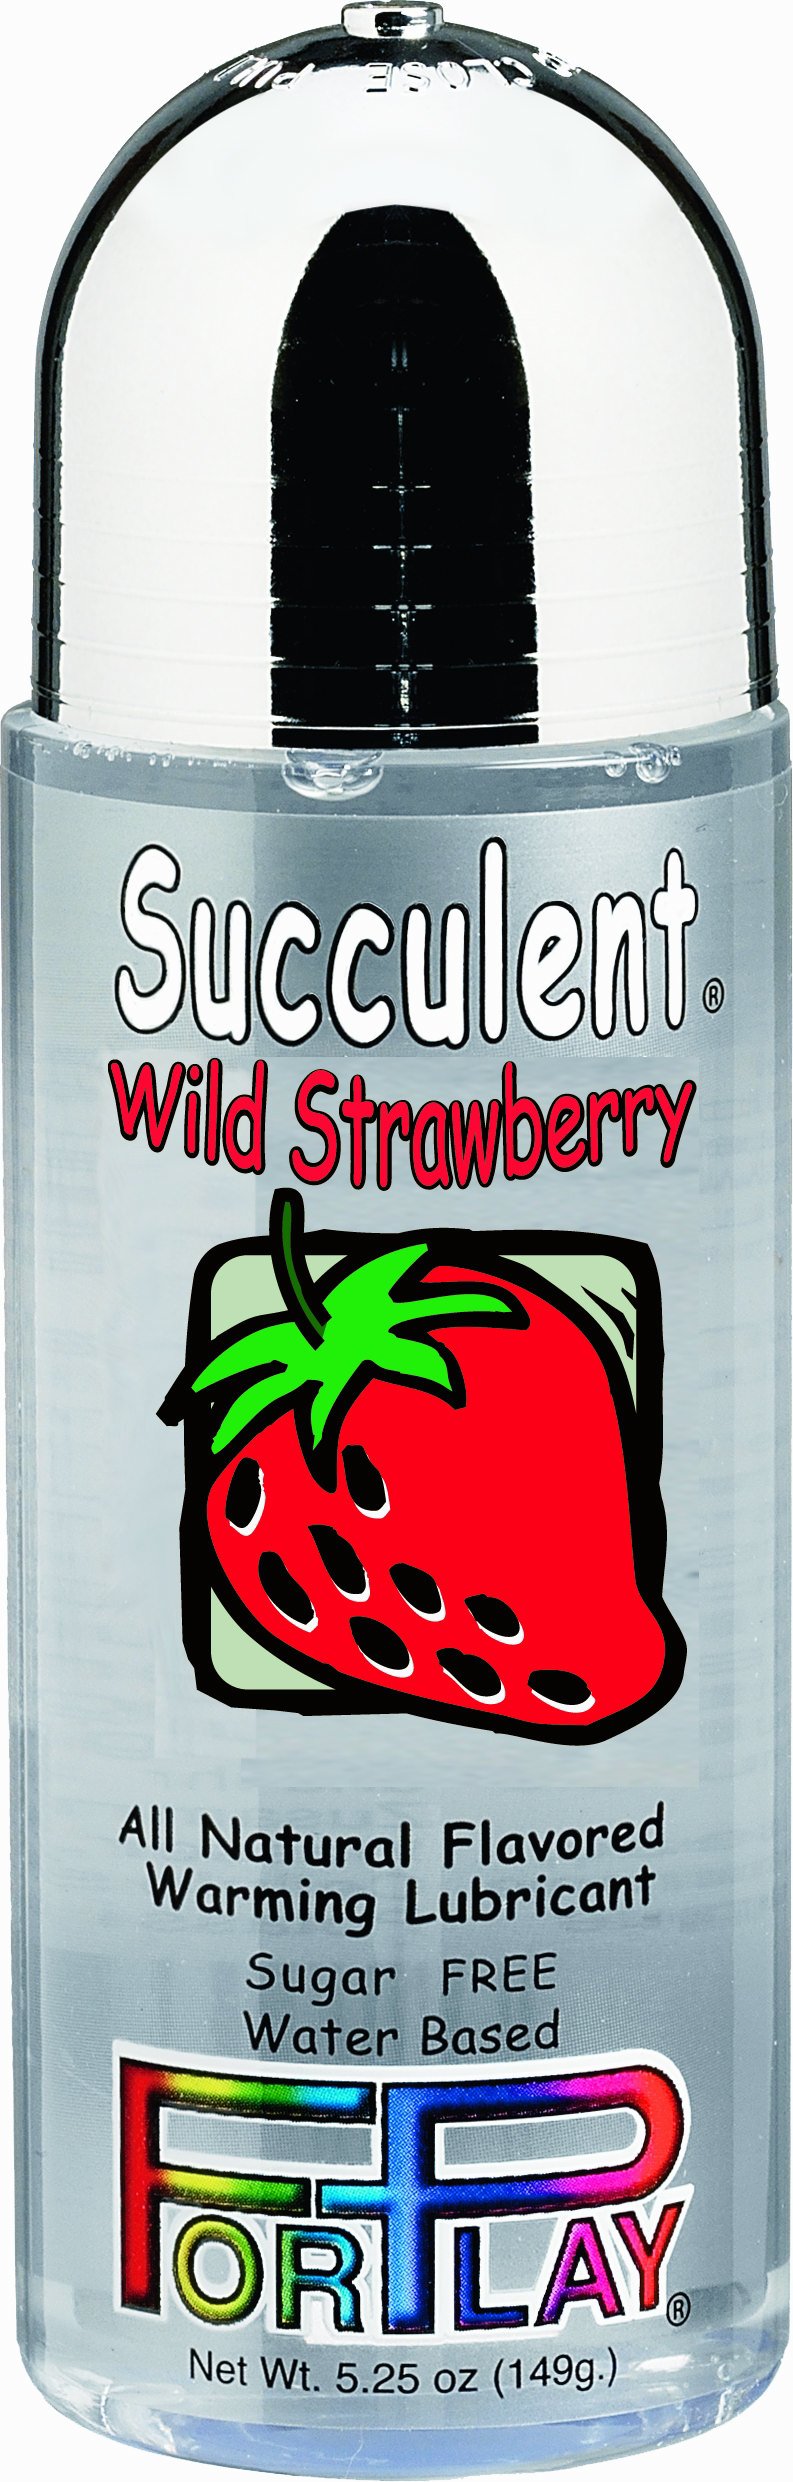 FORPLAY SUCCULENTS WILD STRAWBERRY 5.25oz.